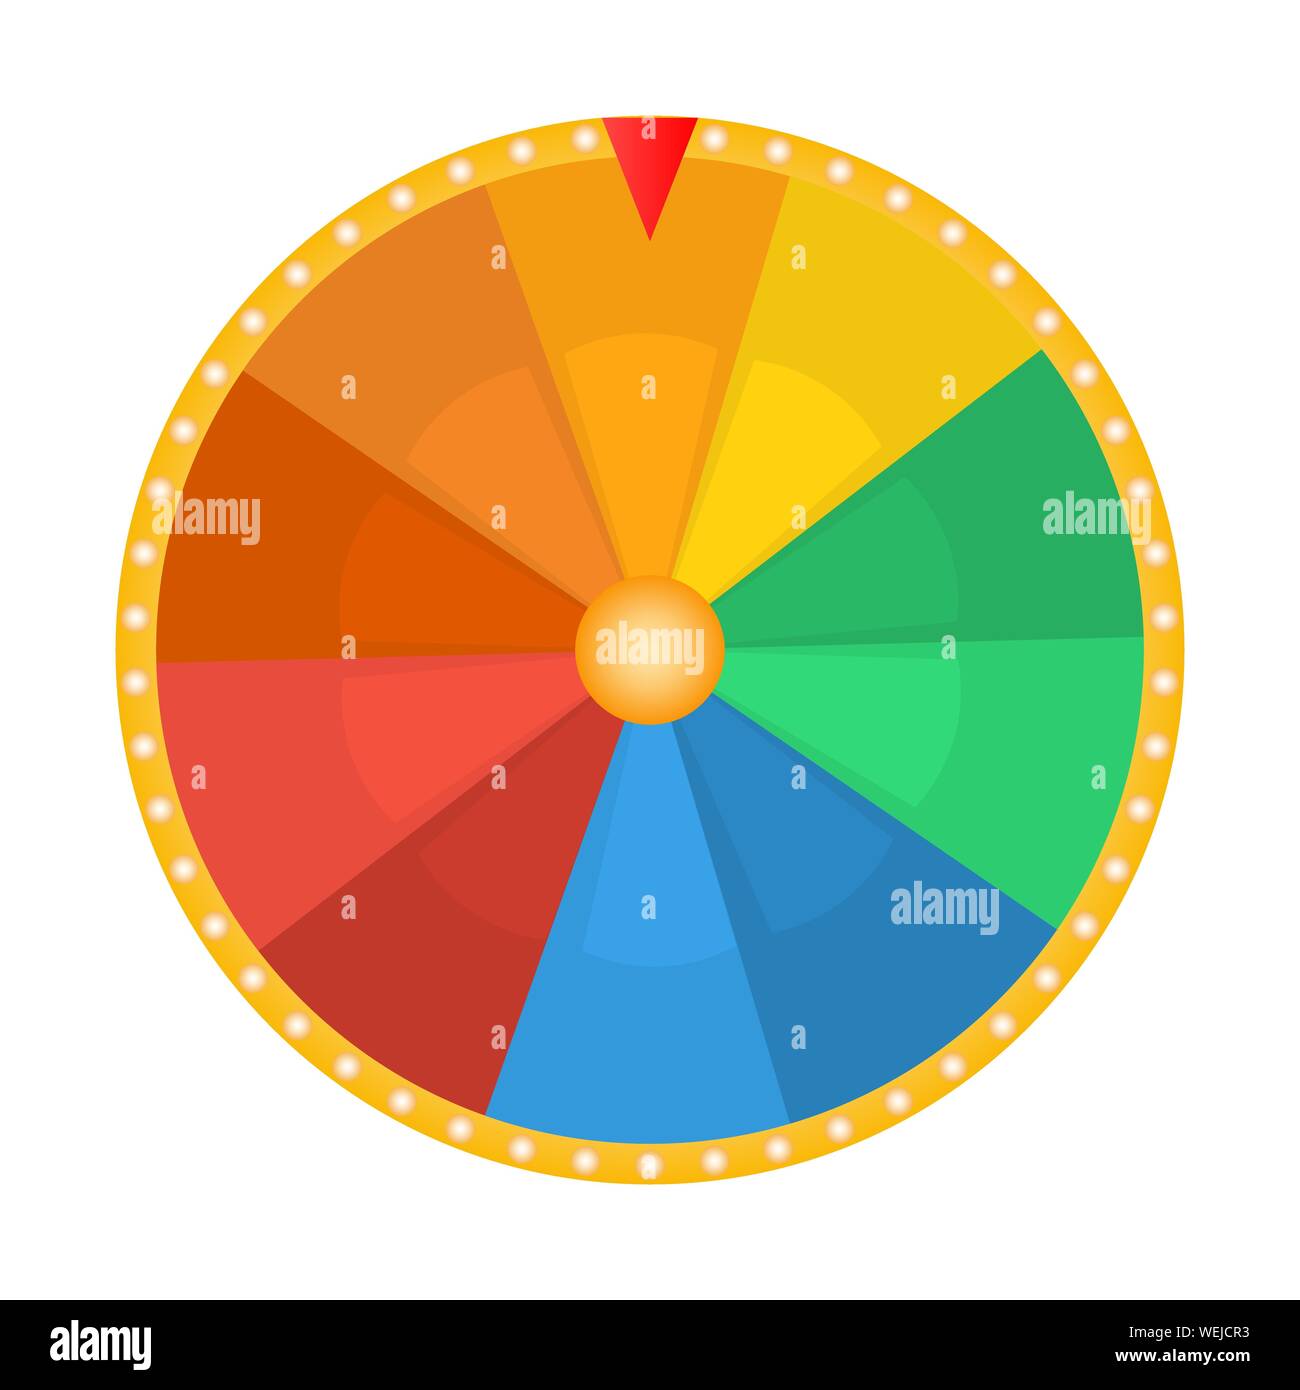 Wheel of fortune for the prize draw on a white background Stock Vector